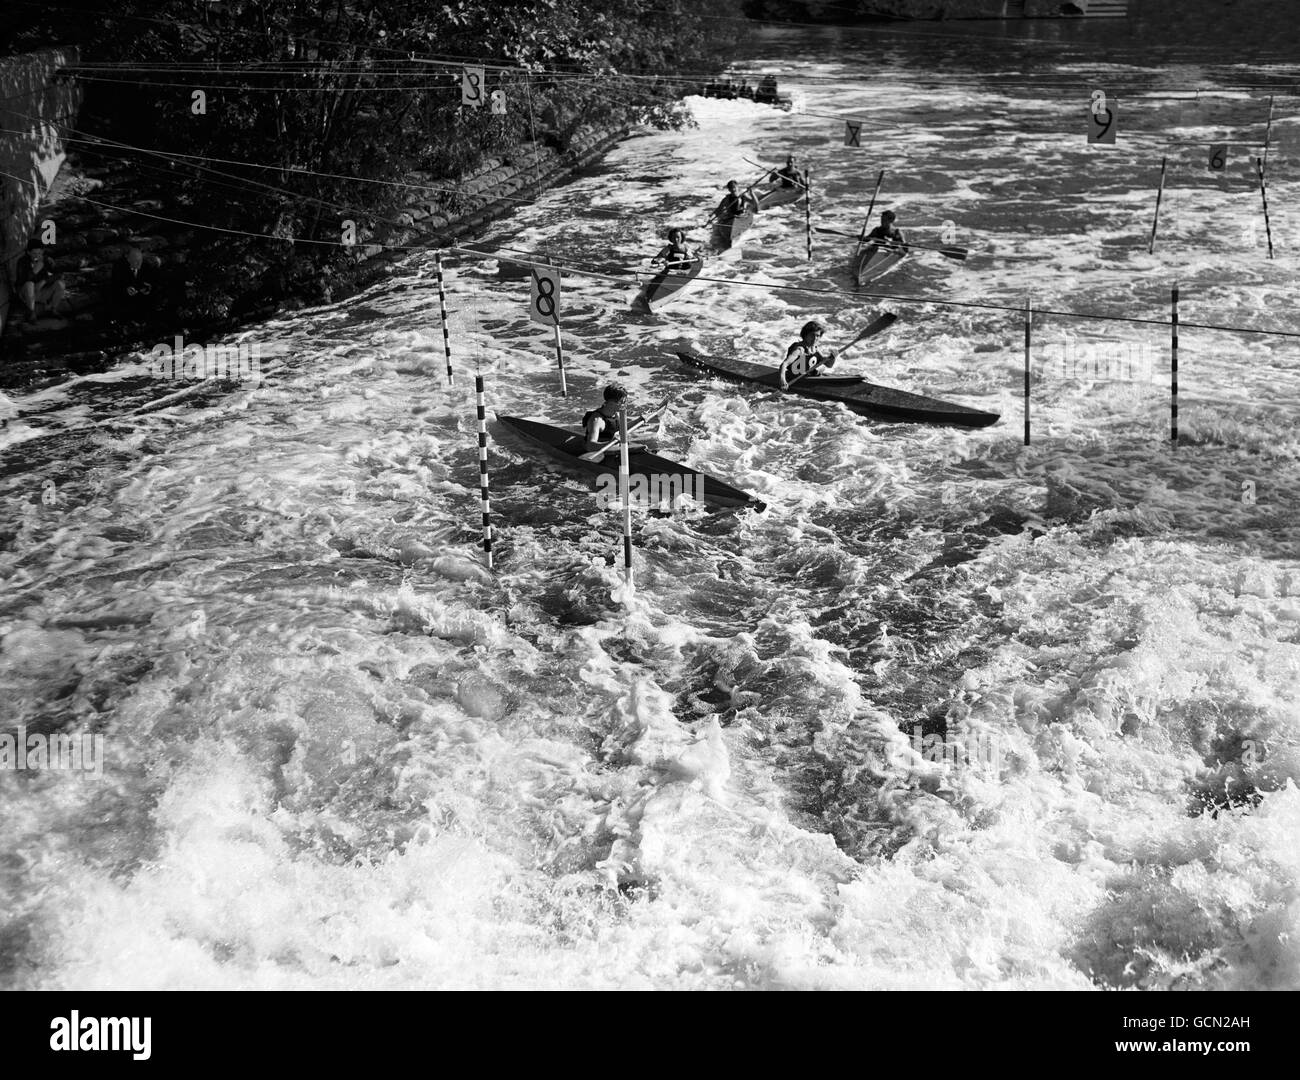 Canoe rapids Black and White Stock Photos & Images - Alamy